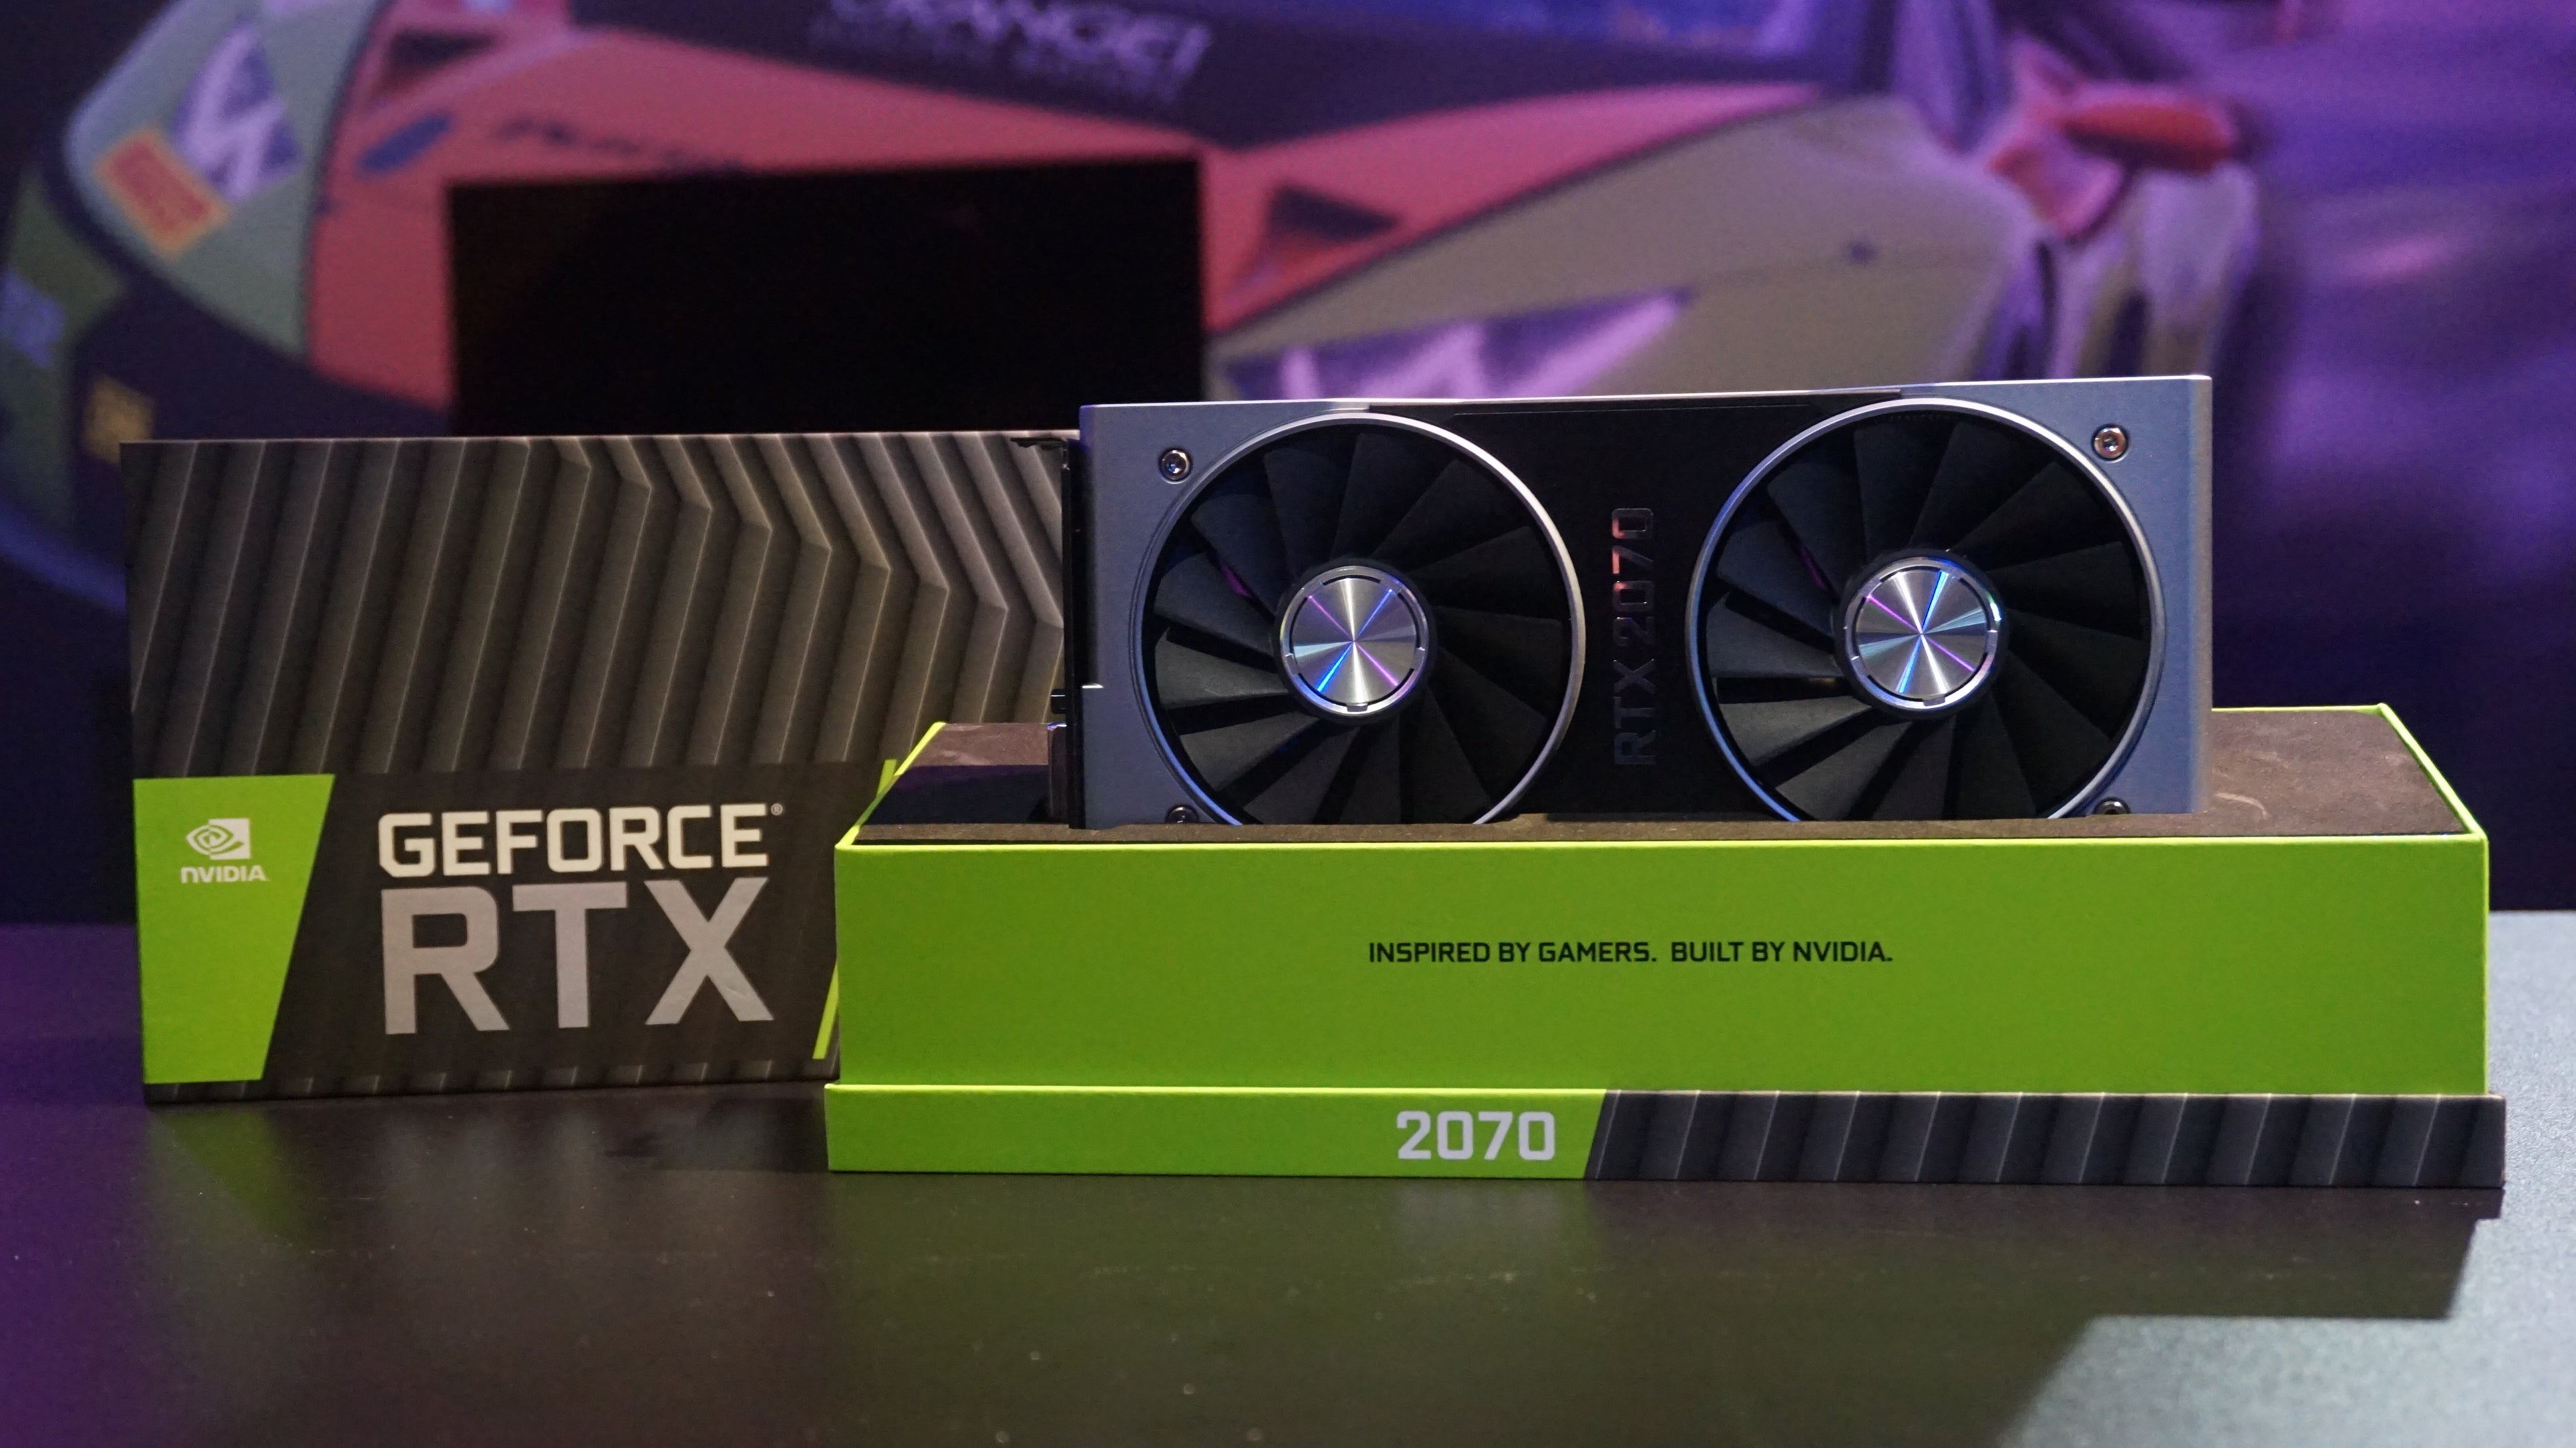 Image for Nvidia's RTX 2070 seems to be only slightly faster than a GTX 1080